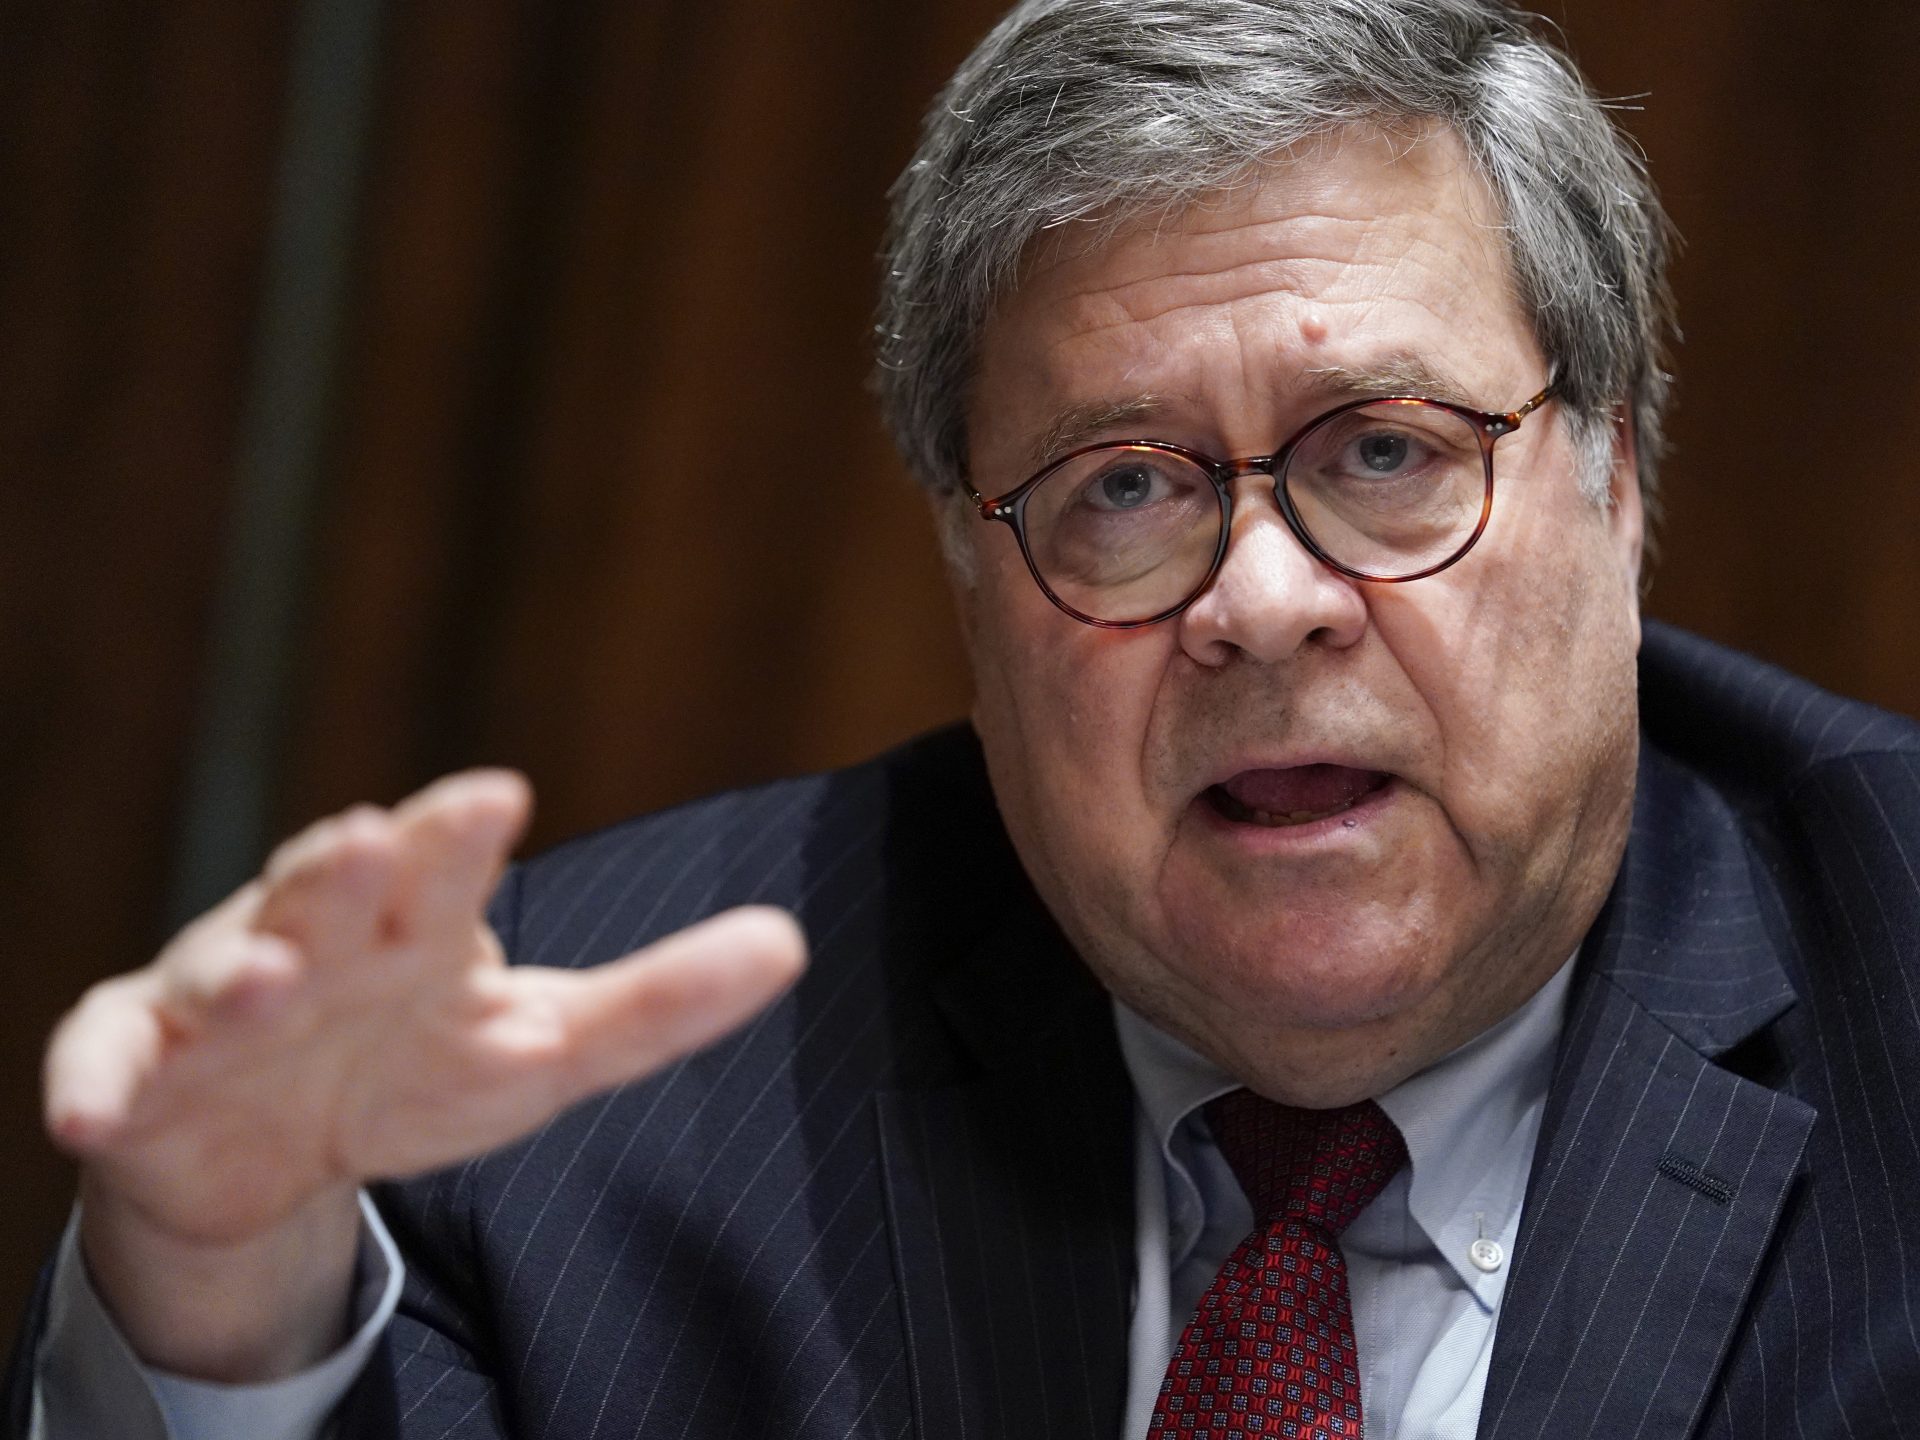 Attorney General William Barr speaks during a roundtable with President Trump on Monday. The Justice Department announced it will resume federal executions next month after a 17-year hiatus.